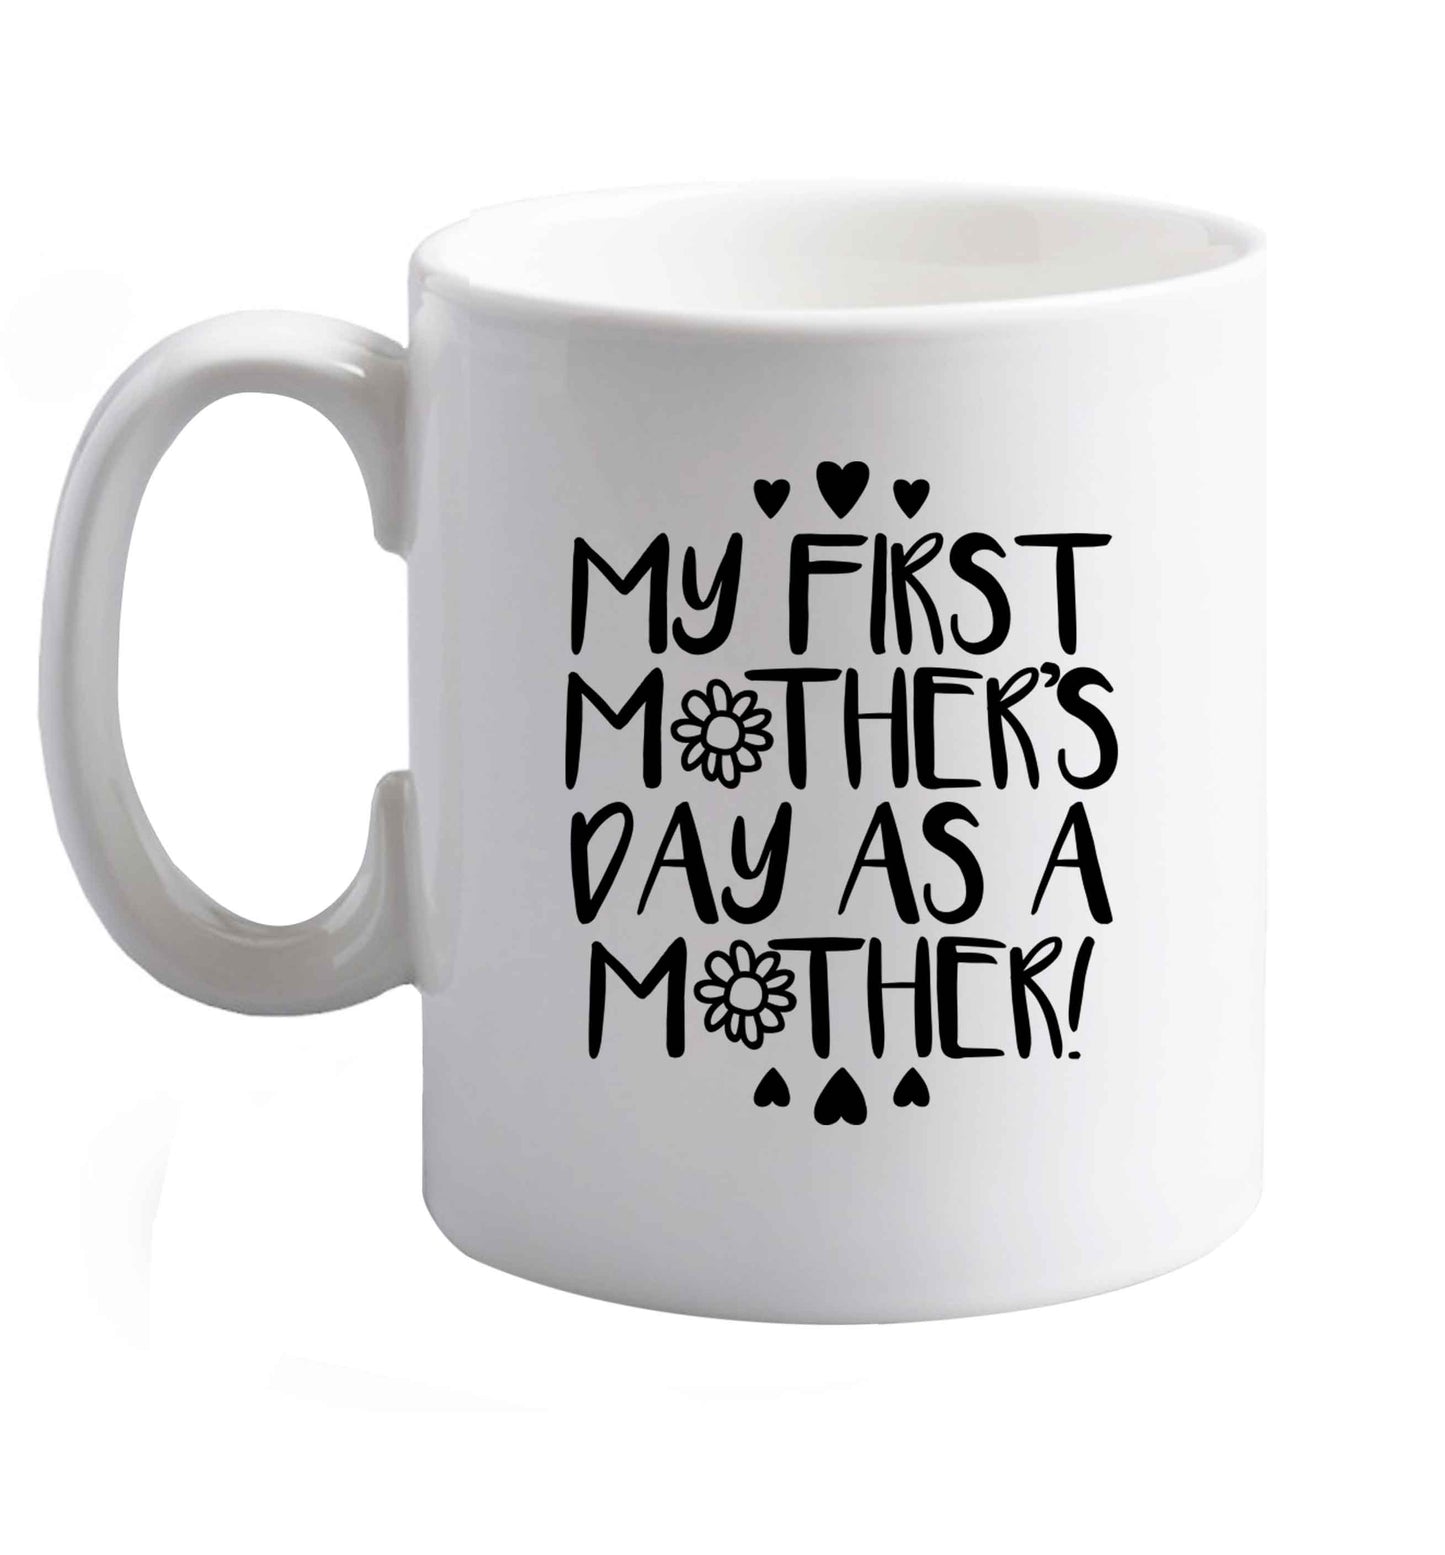 10 oz It's my first mother's day as a mother ceramic mug right handed